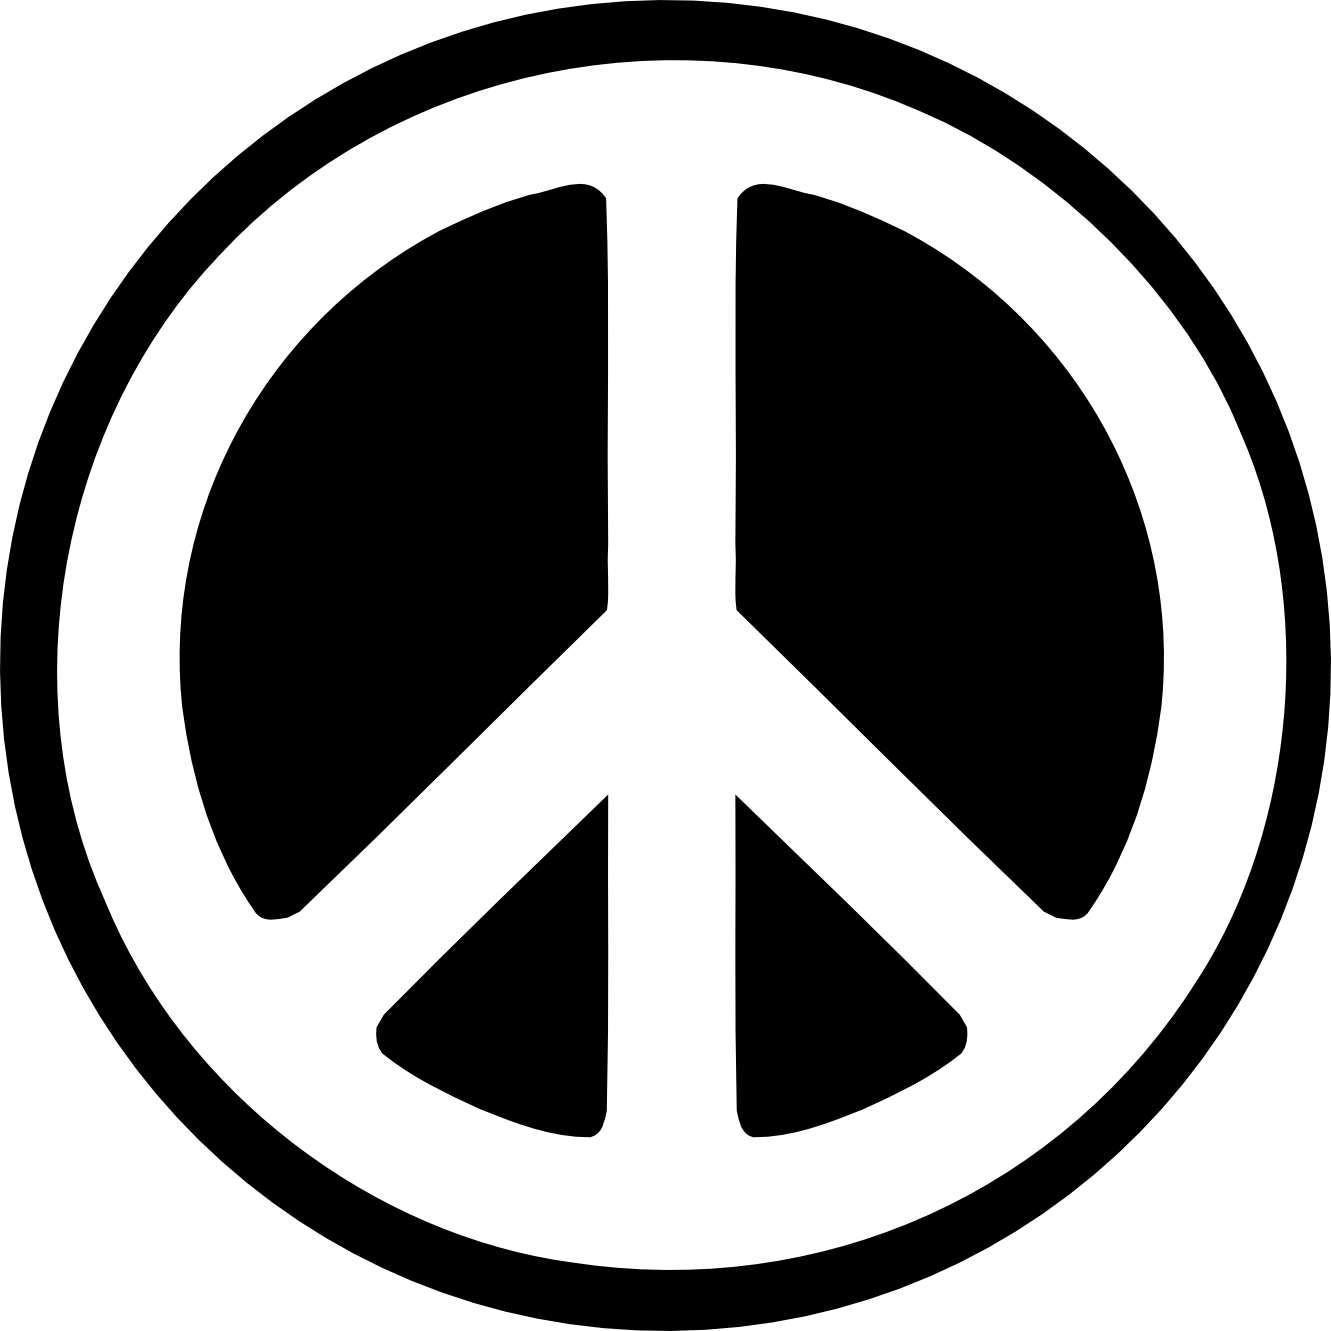 Peace sign images free clip art 2